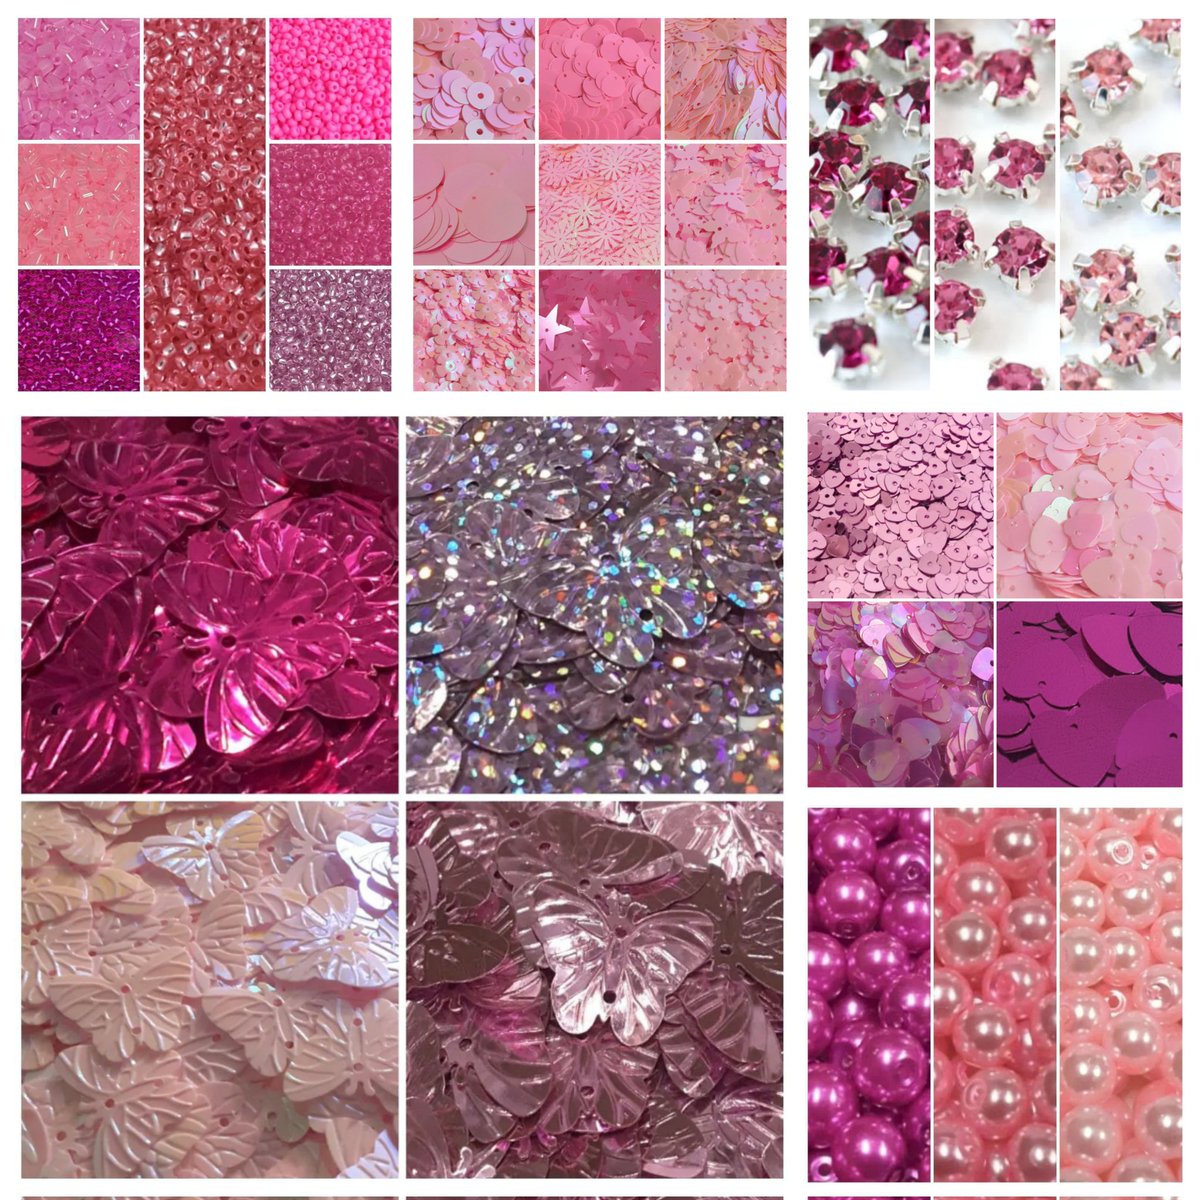 last week, beadmonster.co.uk and sequinworld.co.uk featured beads and sequins in lots of shades of pink 
#BeadMonster #Beads #EverythingsBetterWithBeads 
#SequinWorld #Sequins #EverythingsBetterWithSequins 
21/4/24